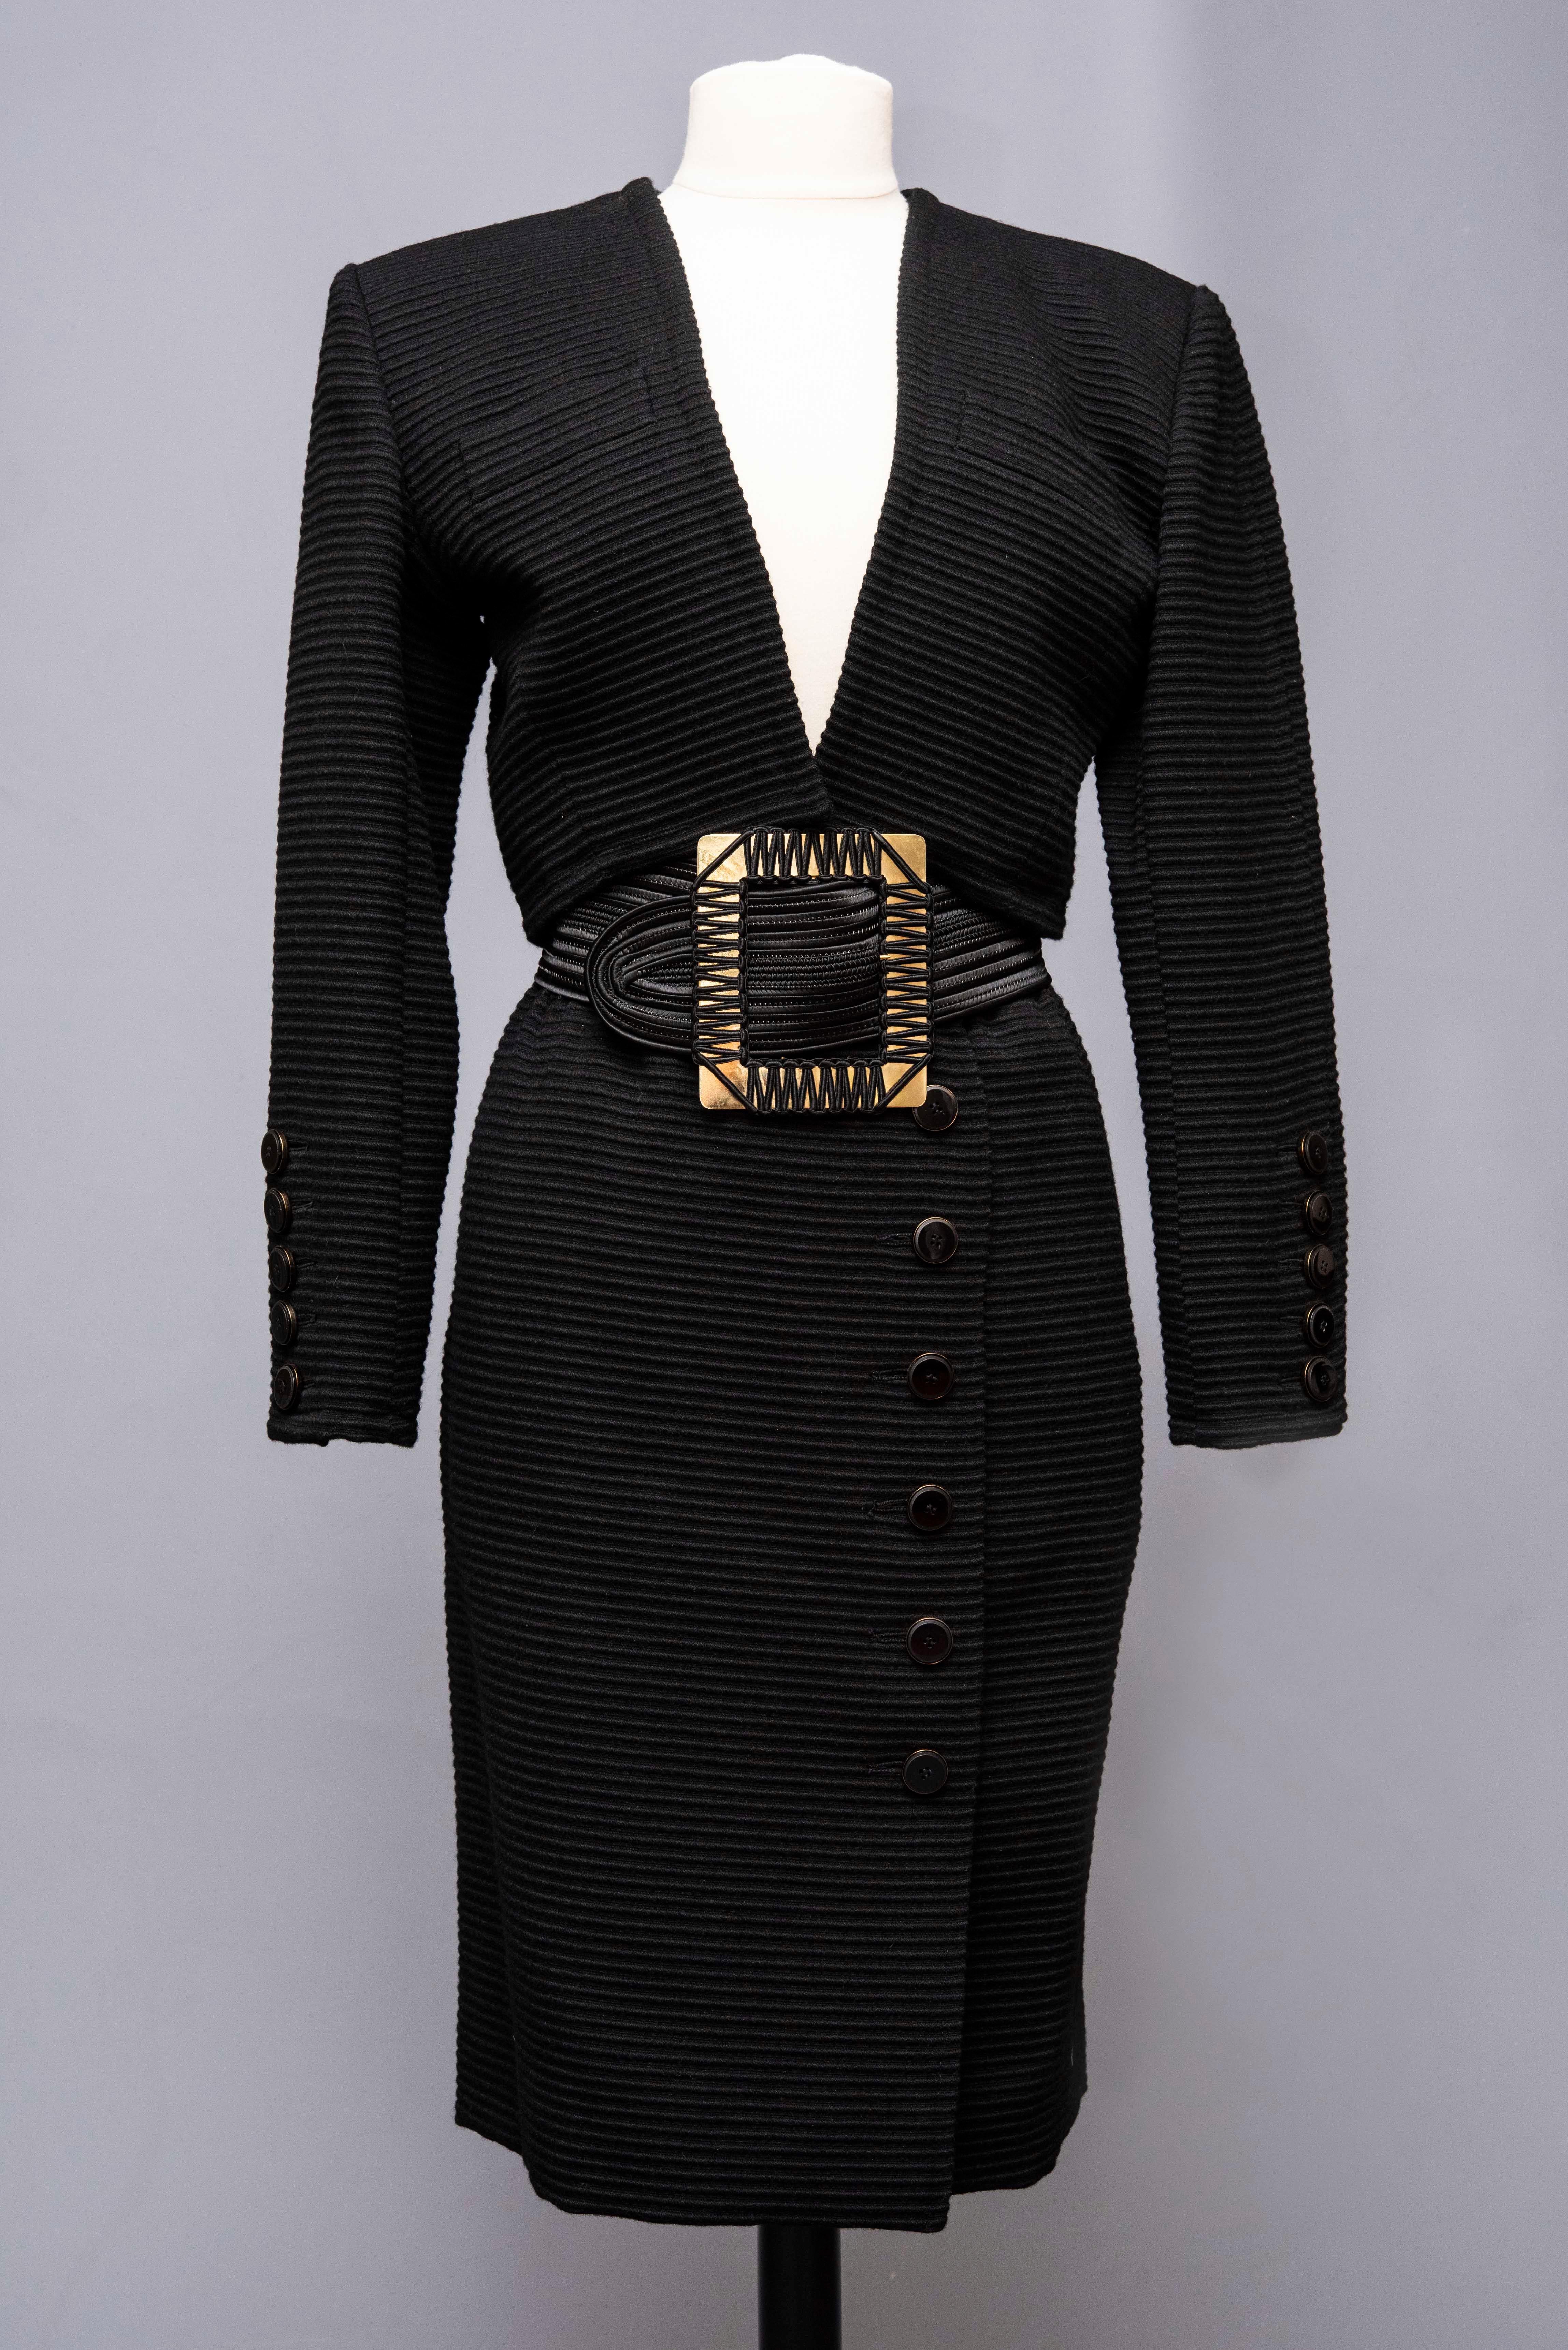 Circa 1988/1992

France

Iconic Yves Saint Laurent Rive Gauche skirt suit in wool fashioned with large parallel ribs Circa 1988/1992. High-waisted shoulder bolero with large polished jai buttons, gold-tone brass rims on the cuffs, with a recall on